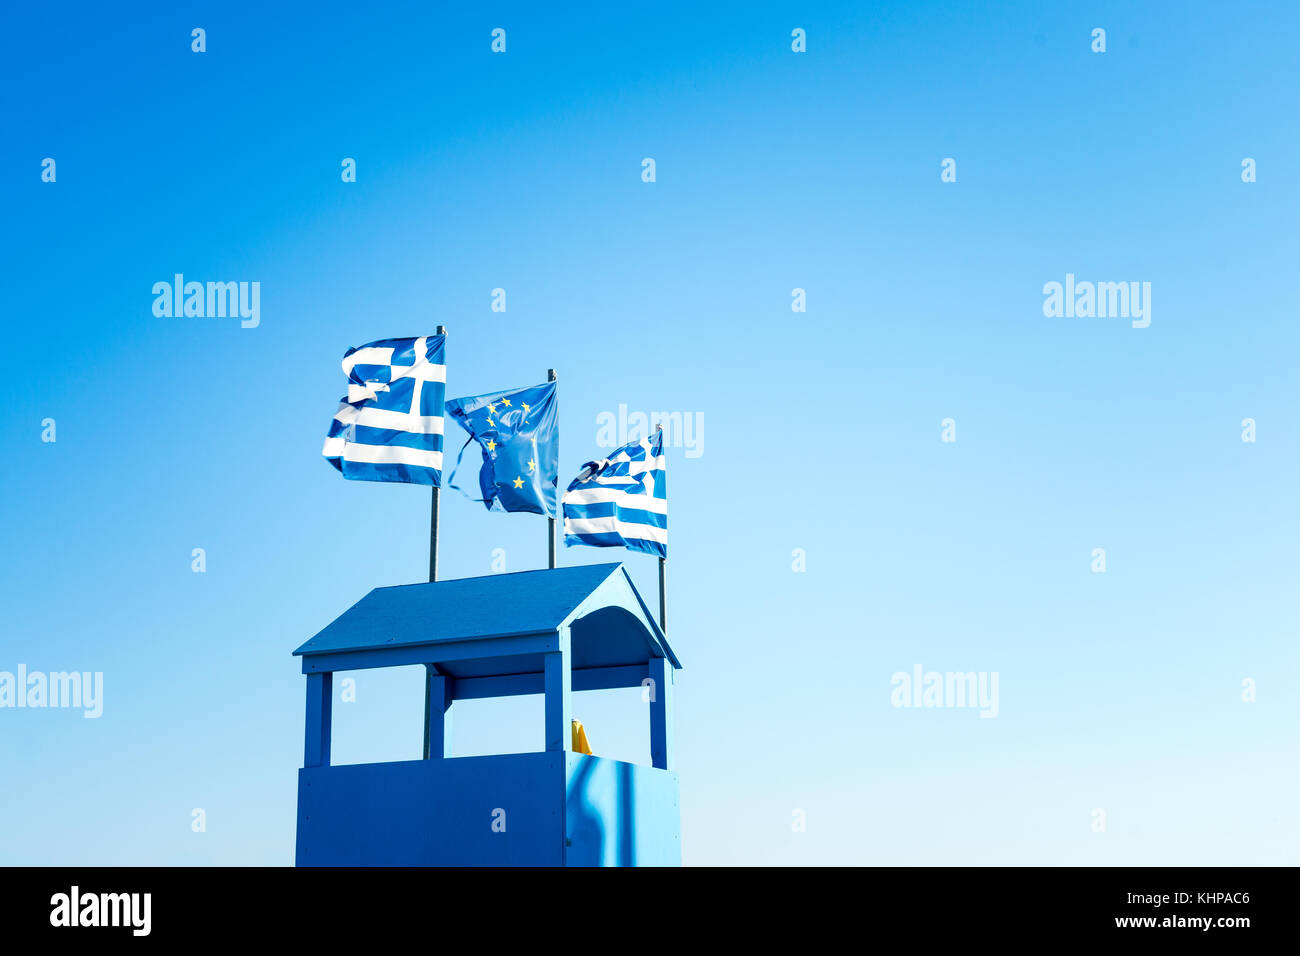 Greek Flag And EU Flag, Blue Sky And Viewpoint Hut In Blue Color In Palaria Katerini, Greece Stock Photo